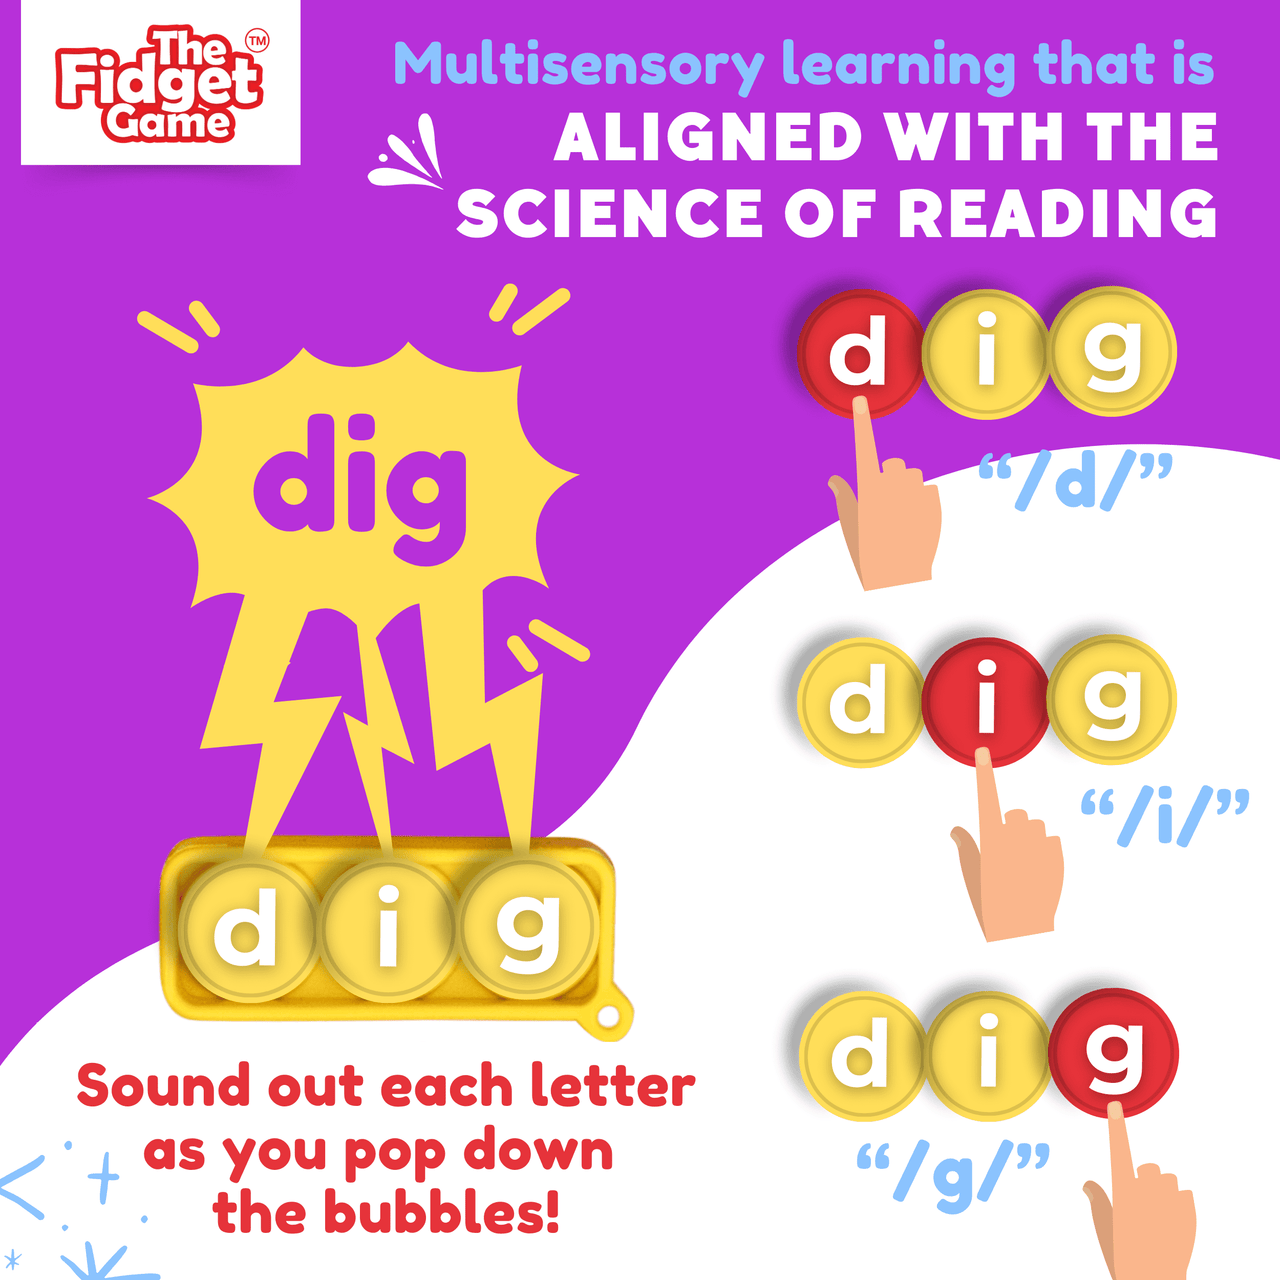 Dig Aligned with the science of reading